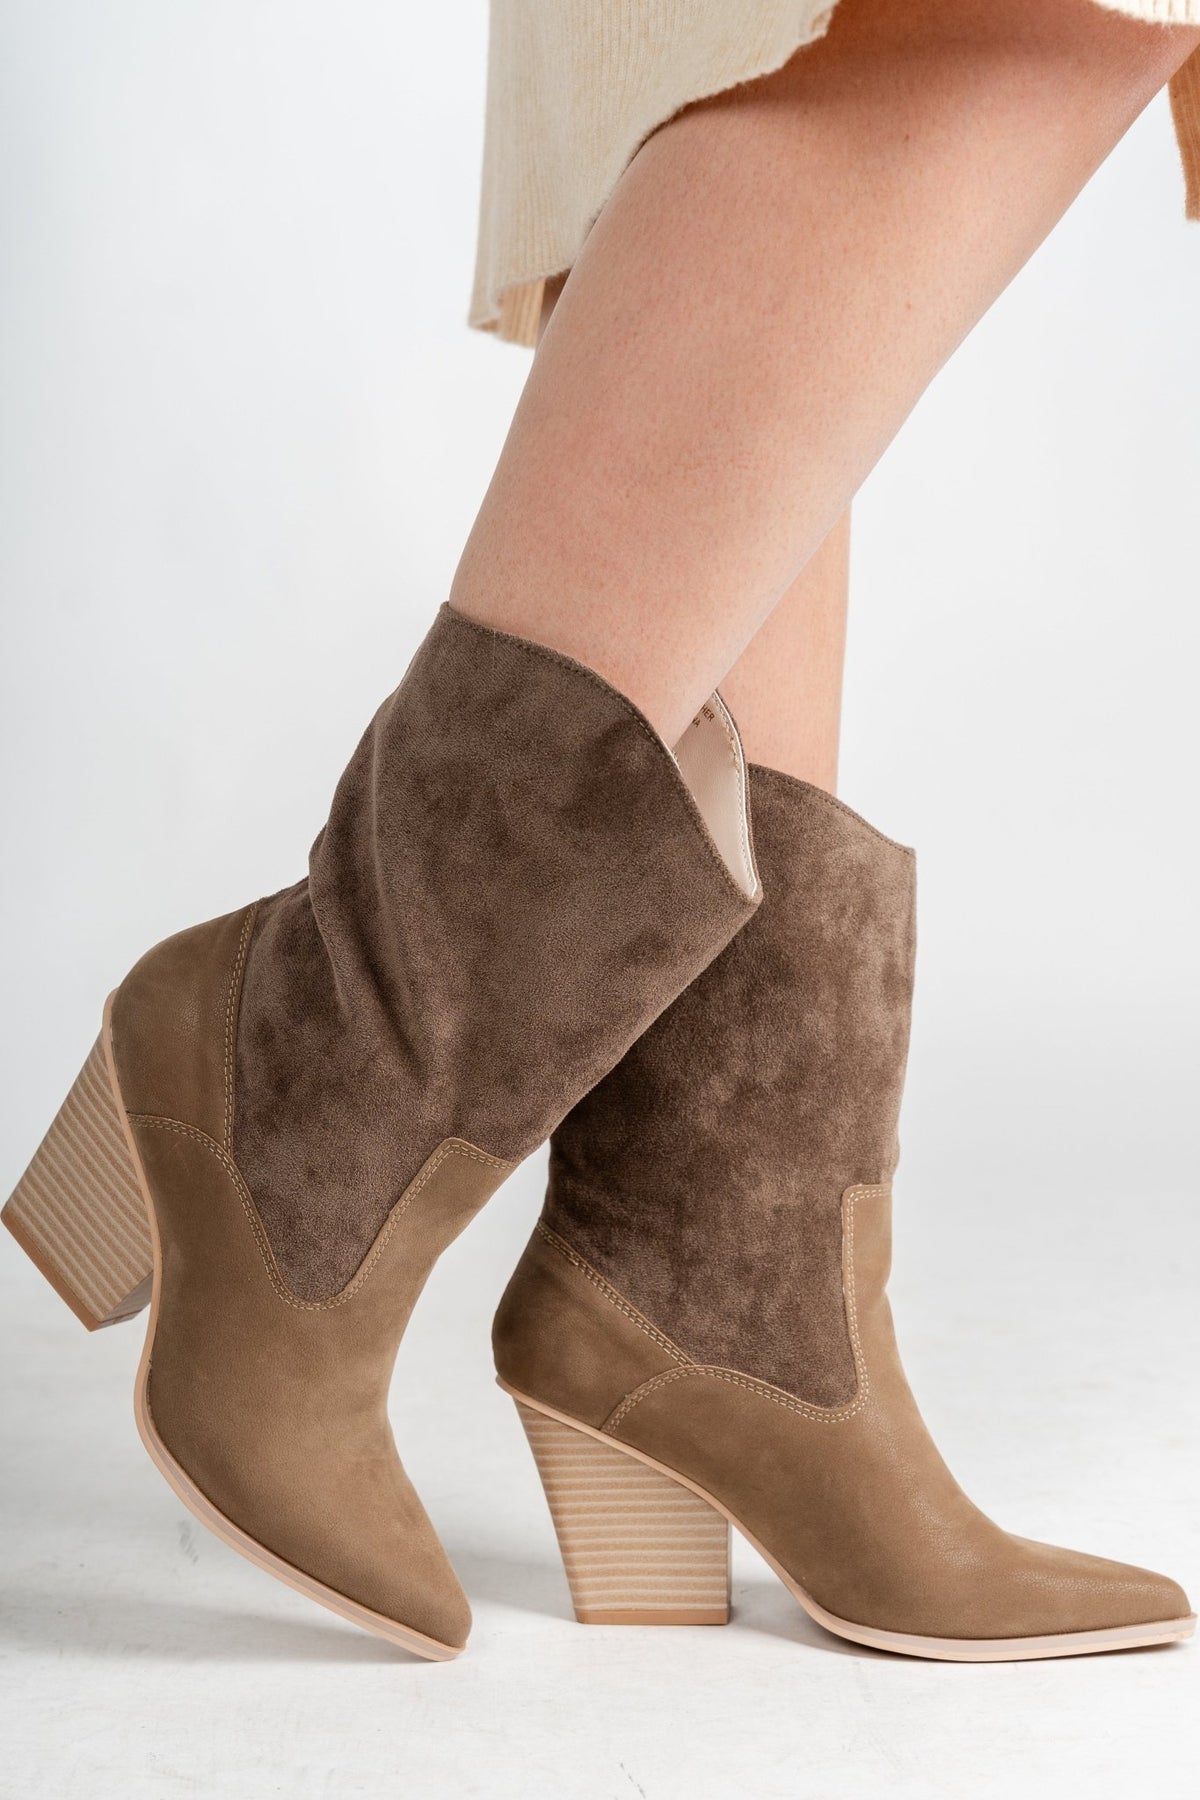 Marseille loose fit boot dark taupe - Cute shoes - Trendy Shoes at Lush Fashion Lounge Boutique in Oklahoma City